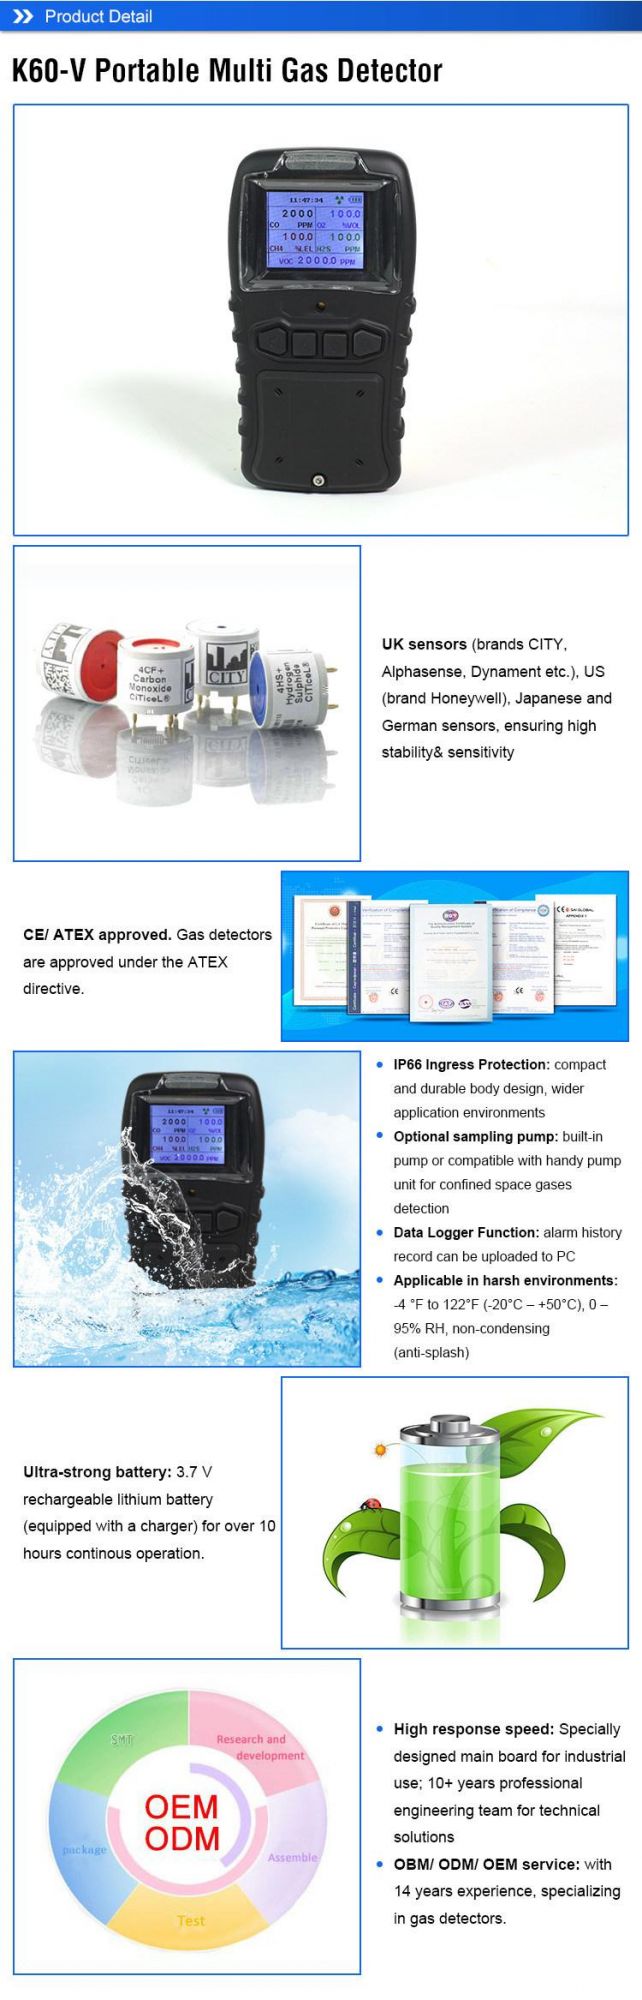 CO2 O3 H2s O2 4 in 1 Gas Detector Manufacturer